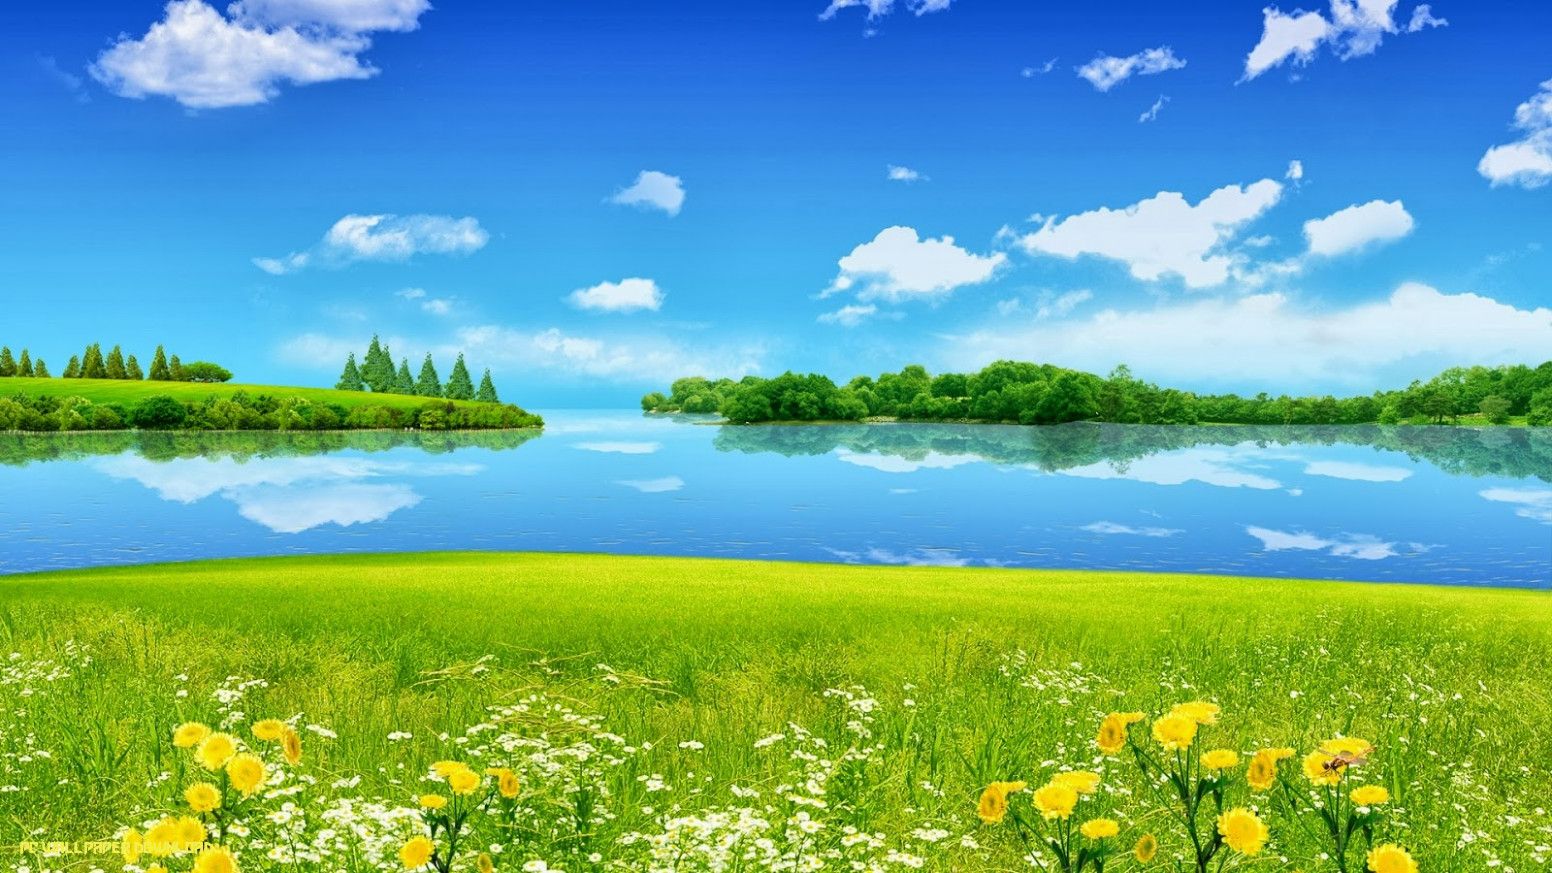 Full HD Nature Wallpaper Free Download For Laptop PC